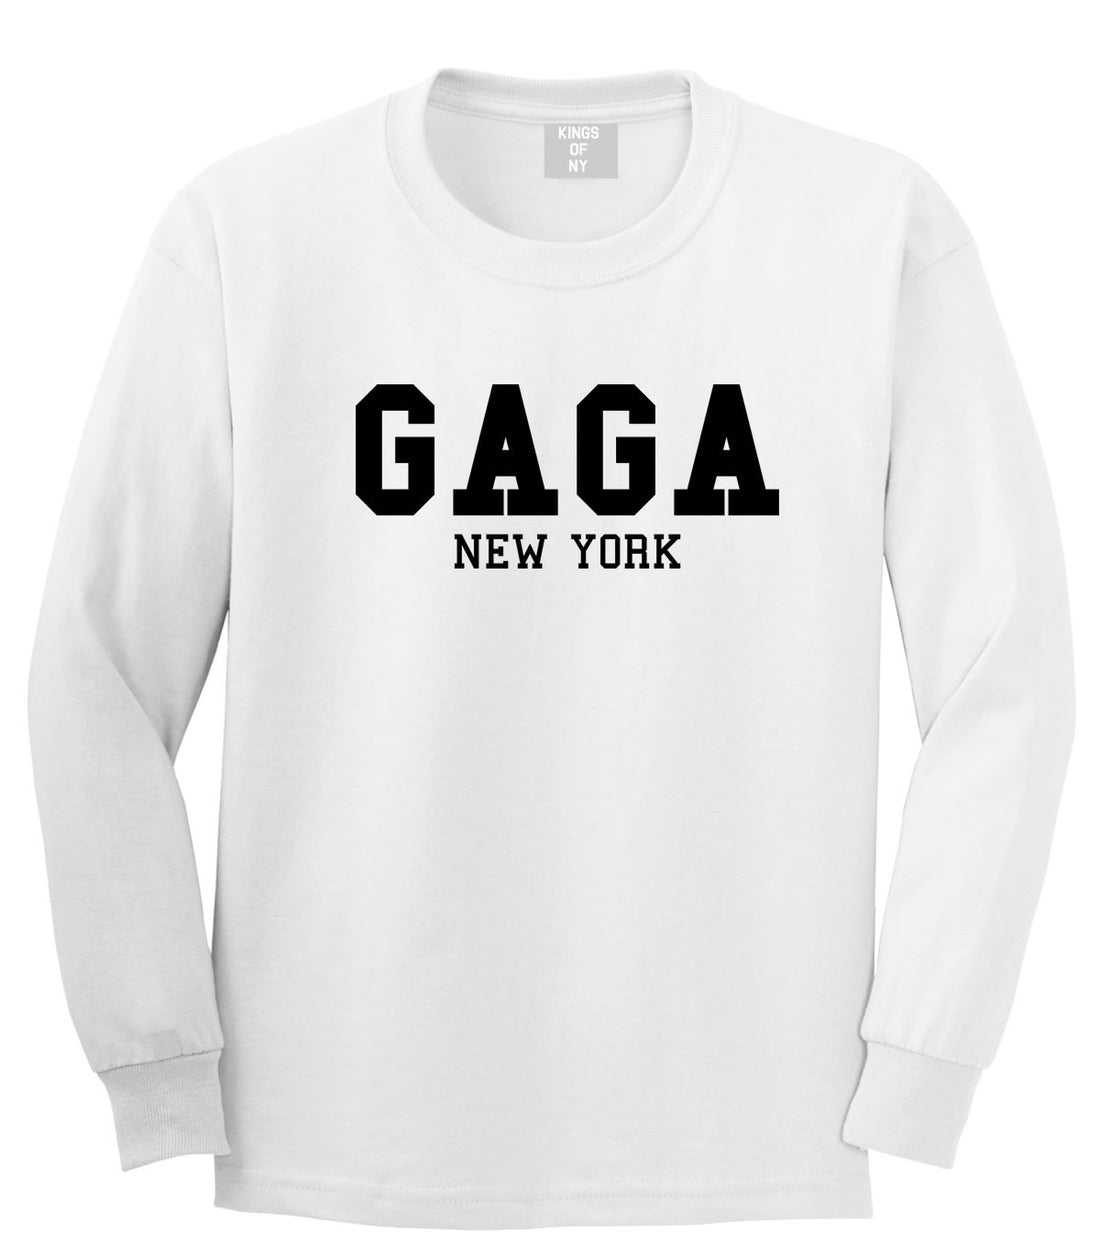 Gaga New York Long Sleeve T-Shirt in White by Kings Of NY